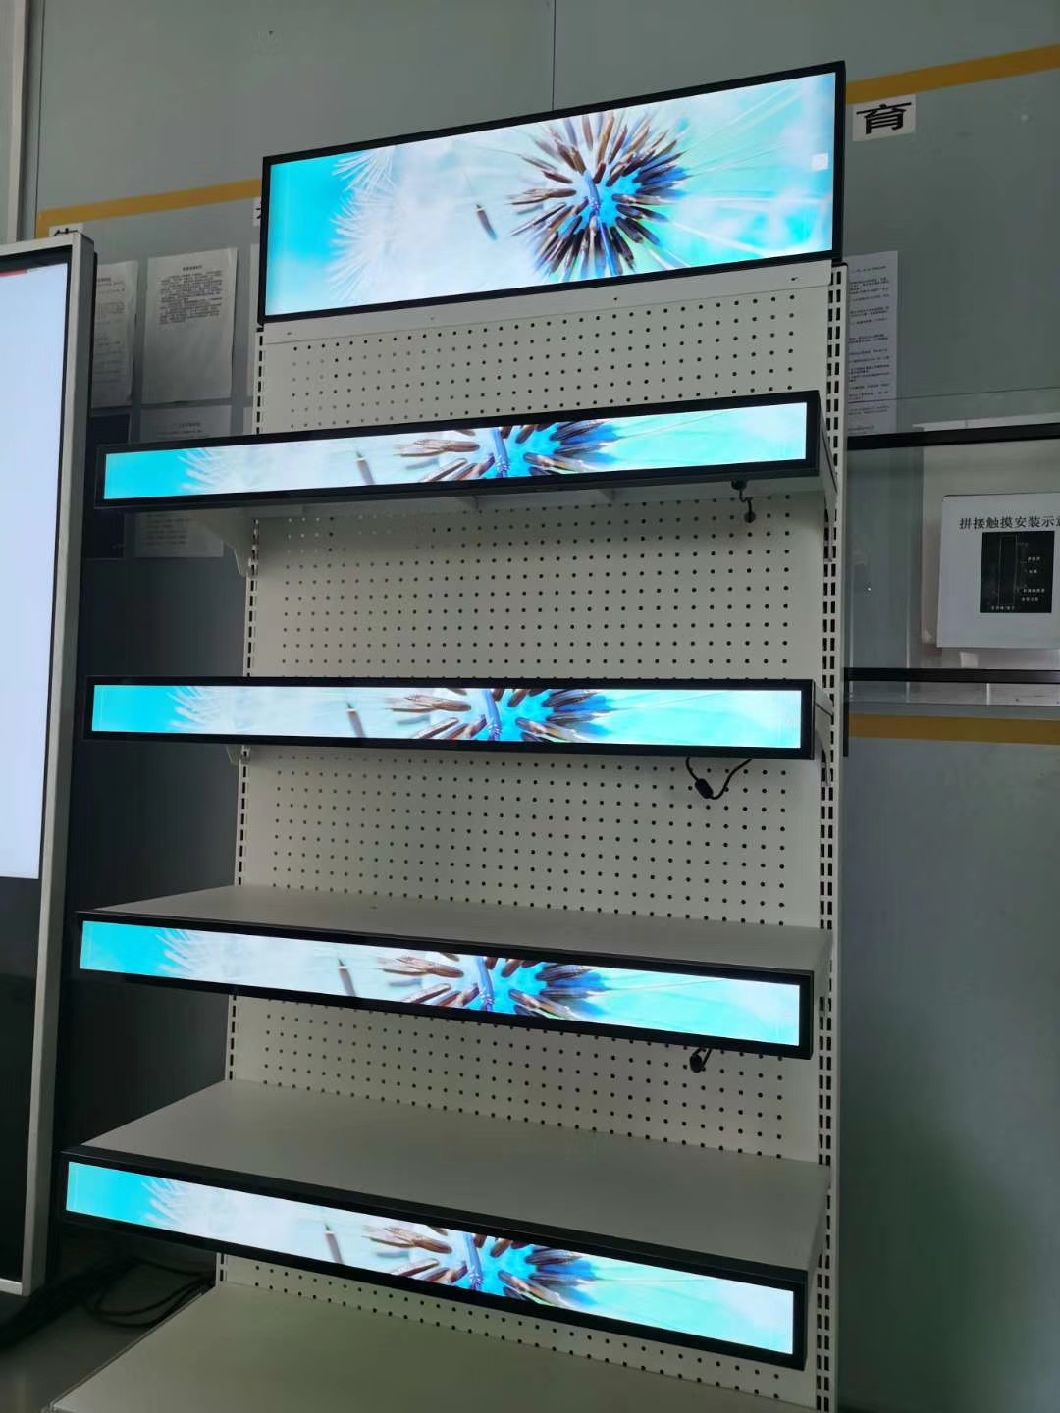 Hot Selling Supermarket Shelf WiFi Display Board Vertical LCD Advertising Monitor Stretched LCD Display Monitor